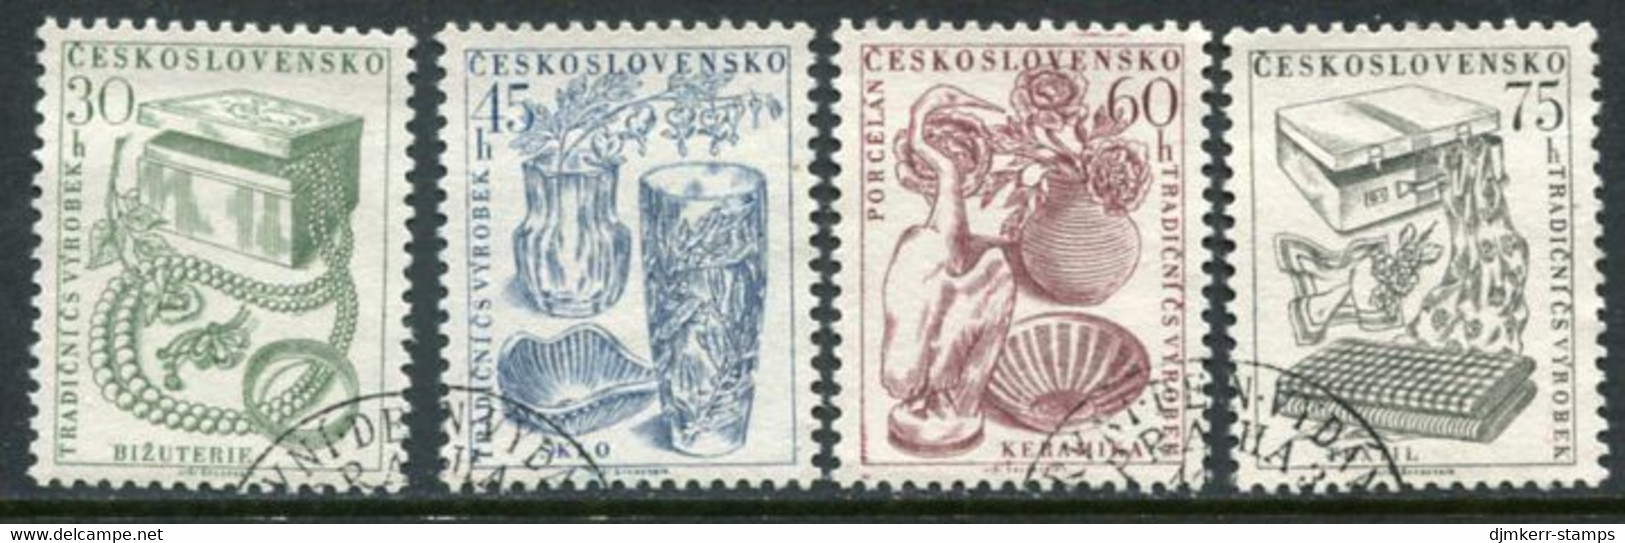 CZECHOSLOVAKIA 1956 Export Products Used.  Michel 954-57 - Used Stamps